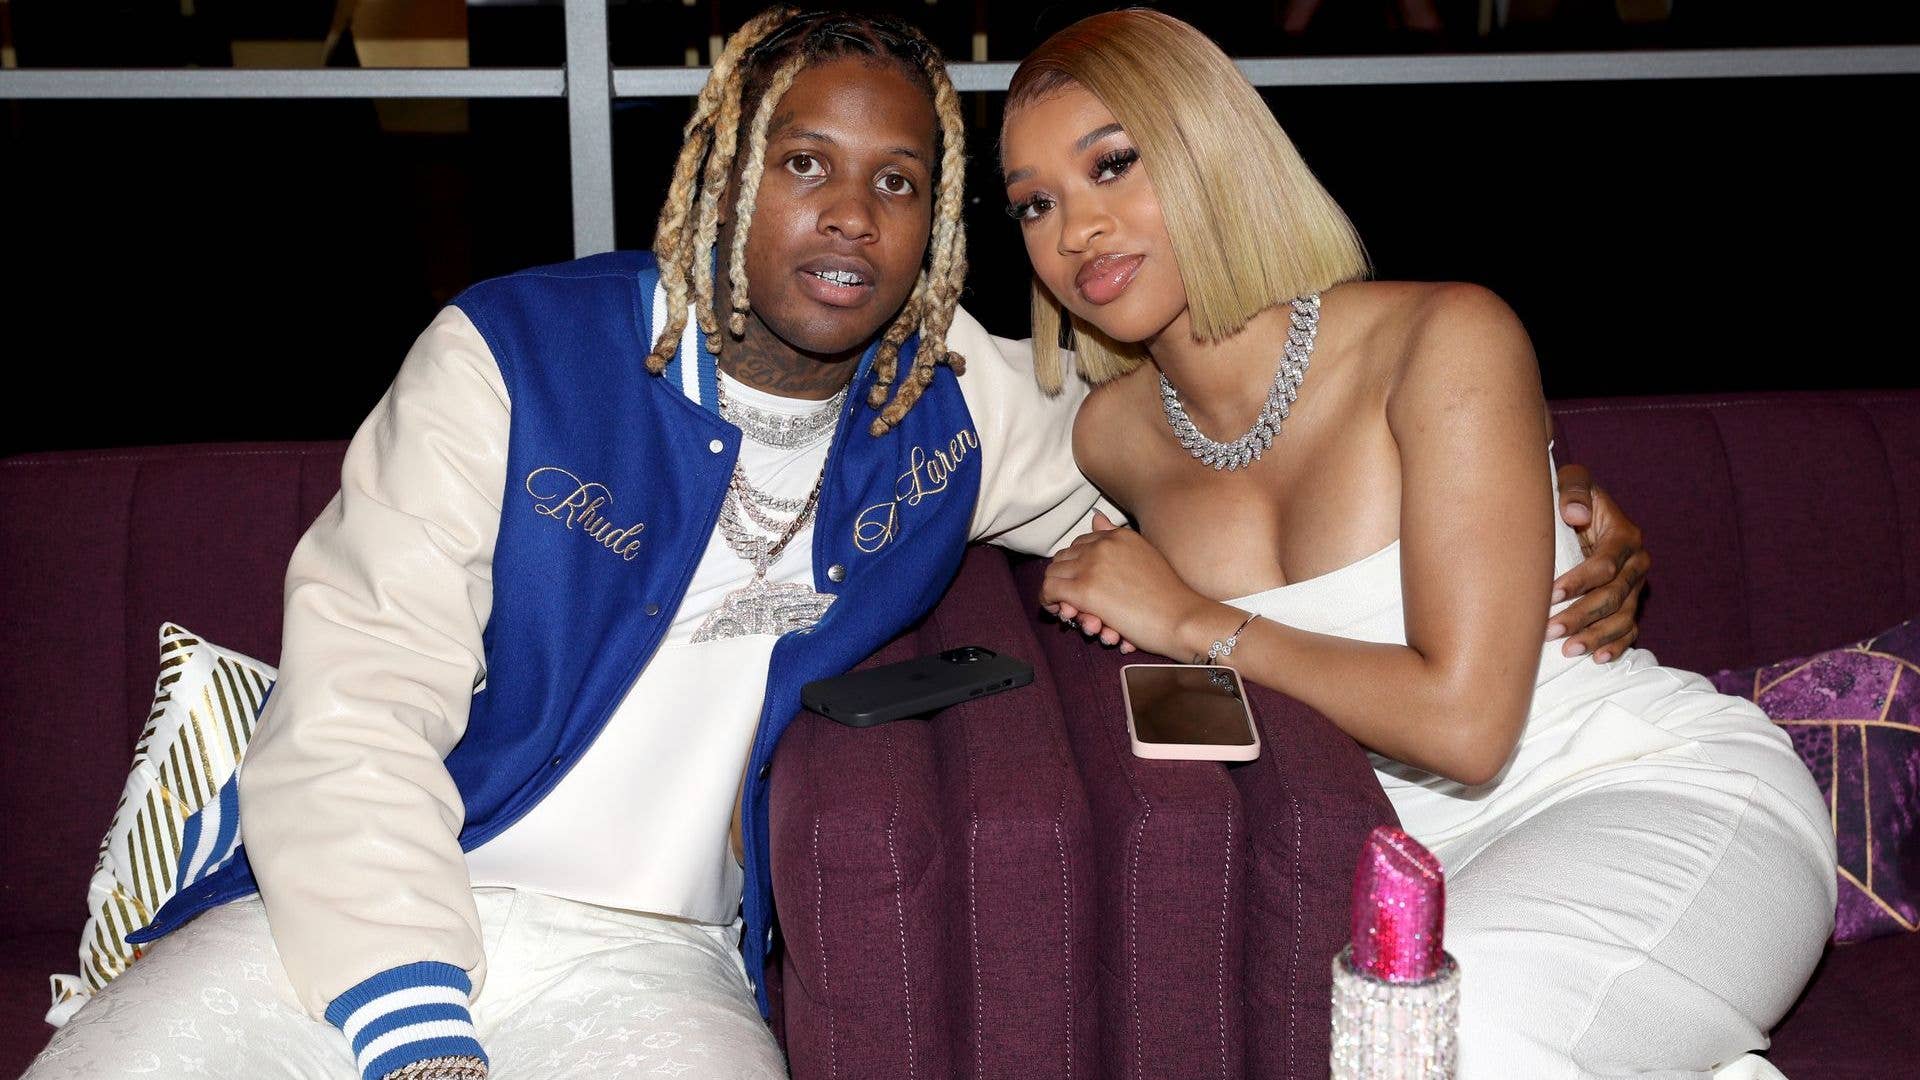 Lil Durk and India Royale attend the BET Awards 2021 at Microsoft Theater